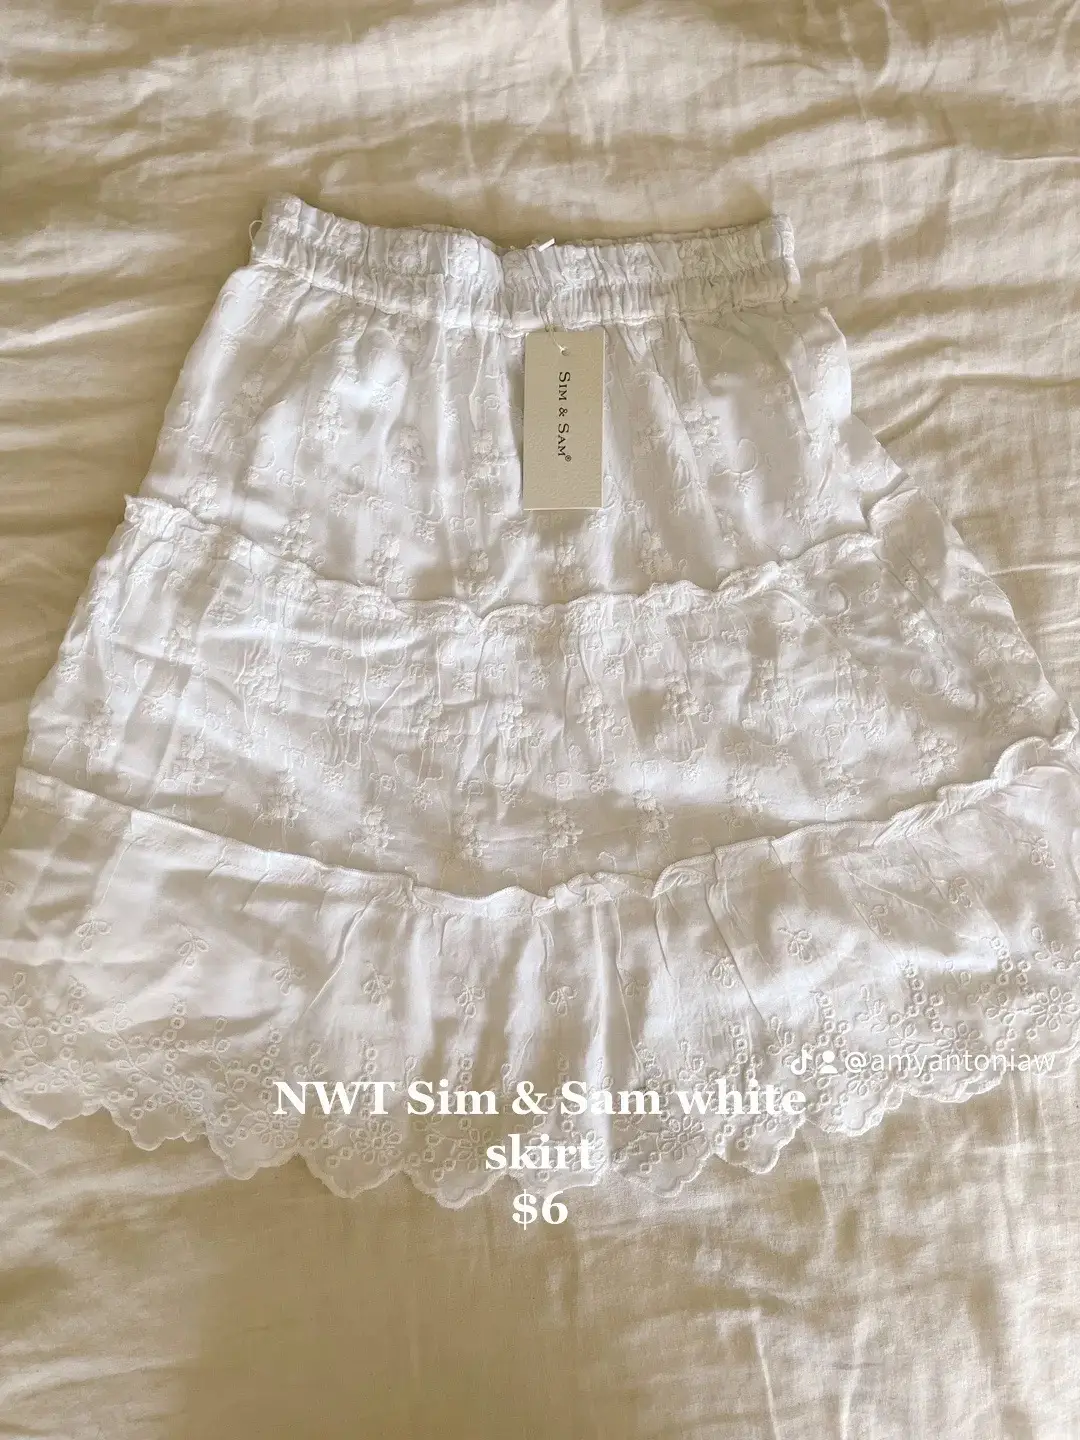  A white skirt with a price of $6.